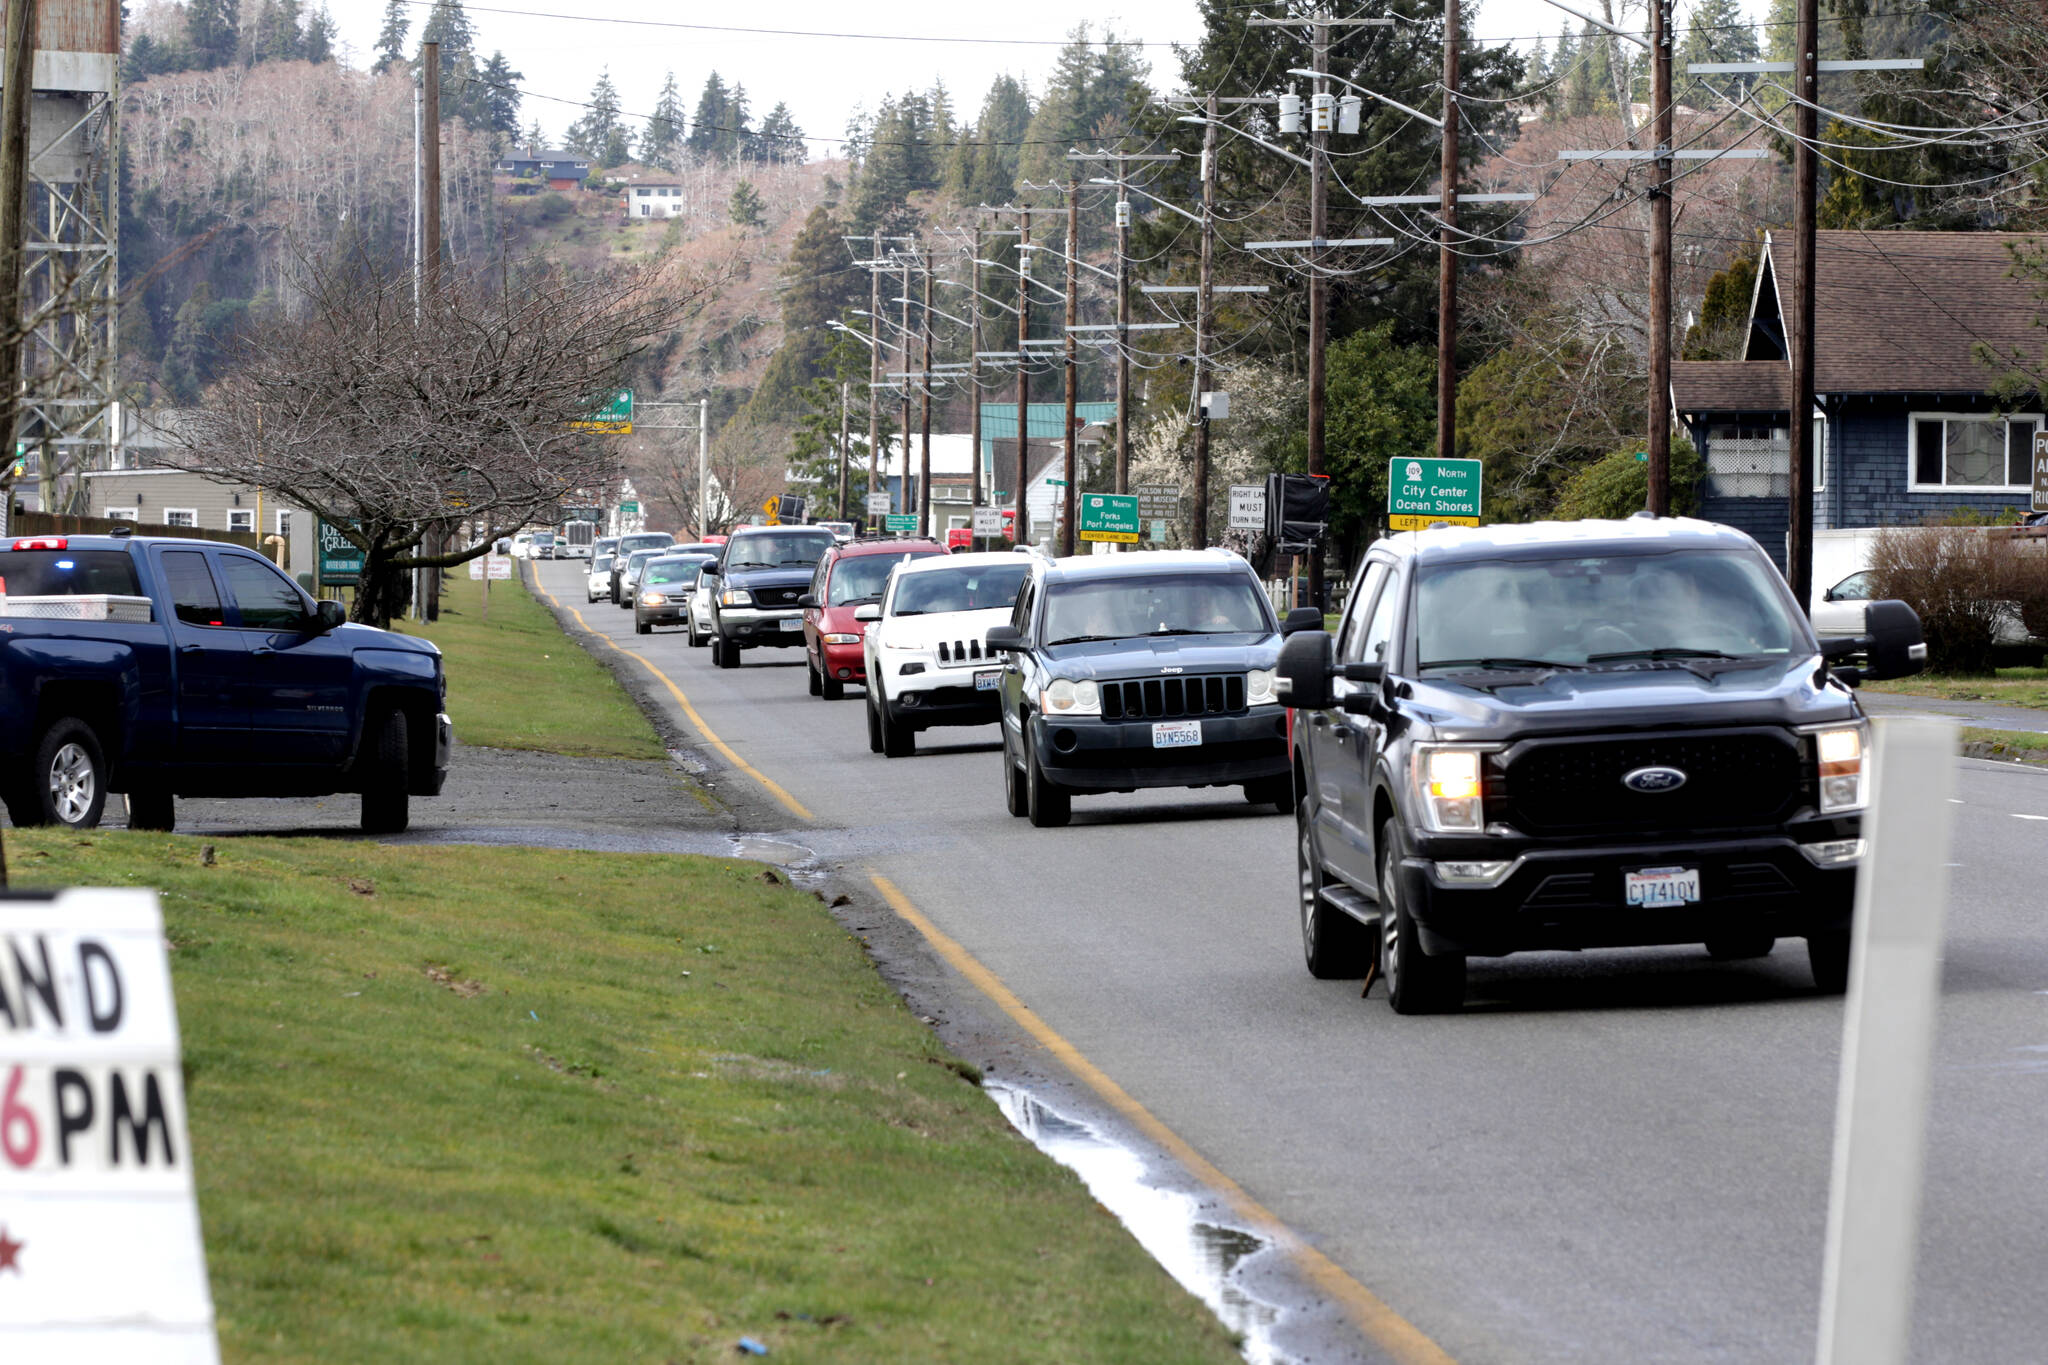 The timing of a bridge malfunction in Hoquiam Monday afternoon made for heavy traffic while police and public works crews directed alternating flows of traffic to bleed off pressure. (Michael S. Lockett / The Daily World)